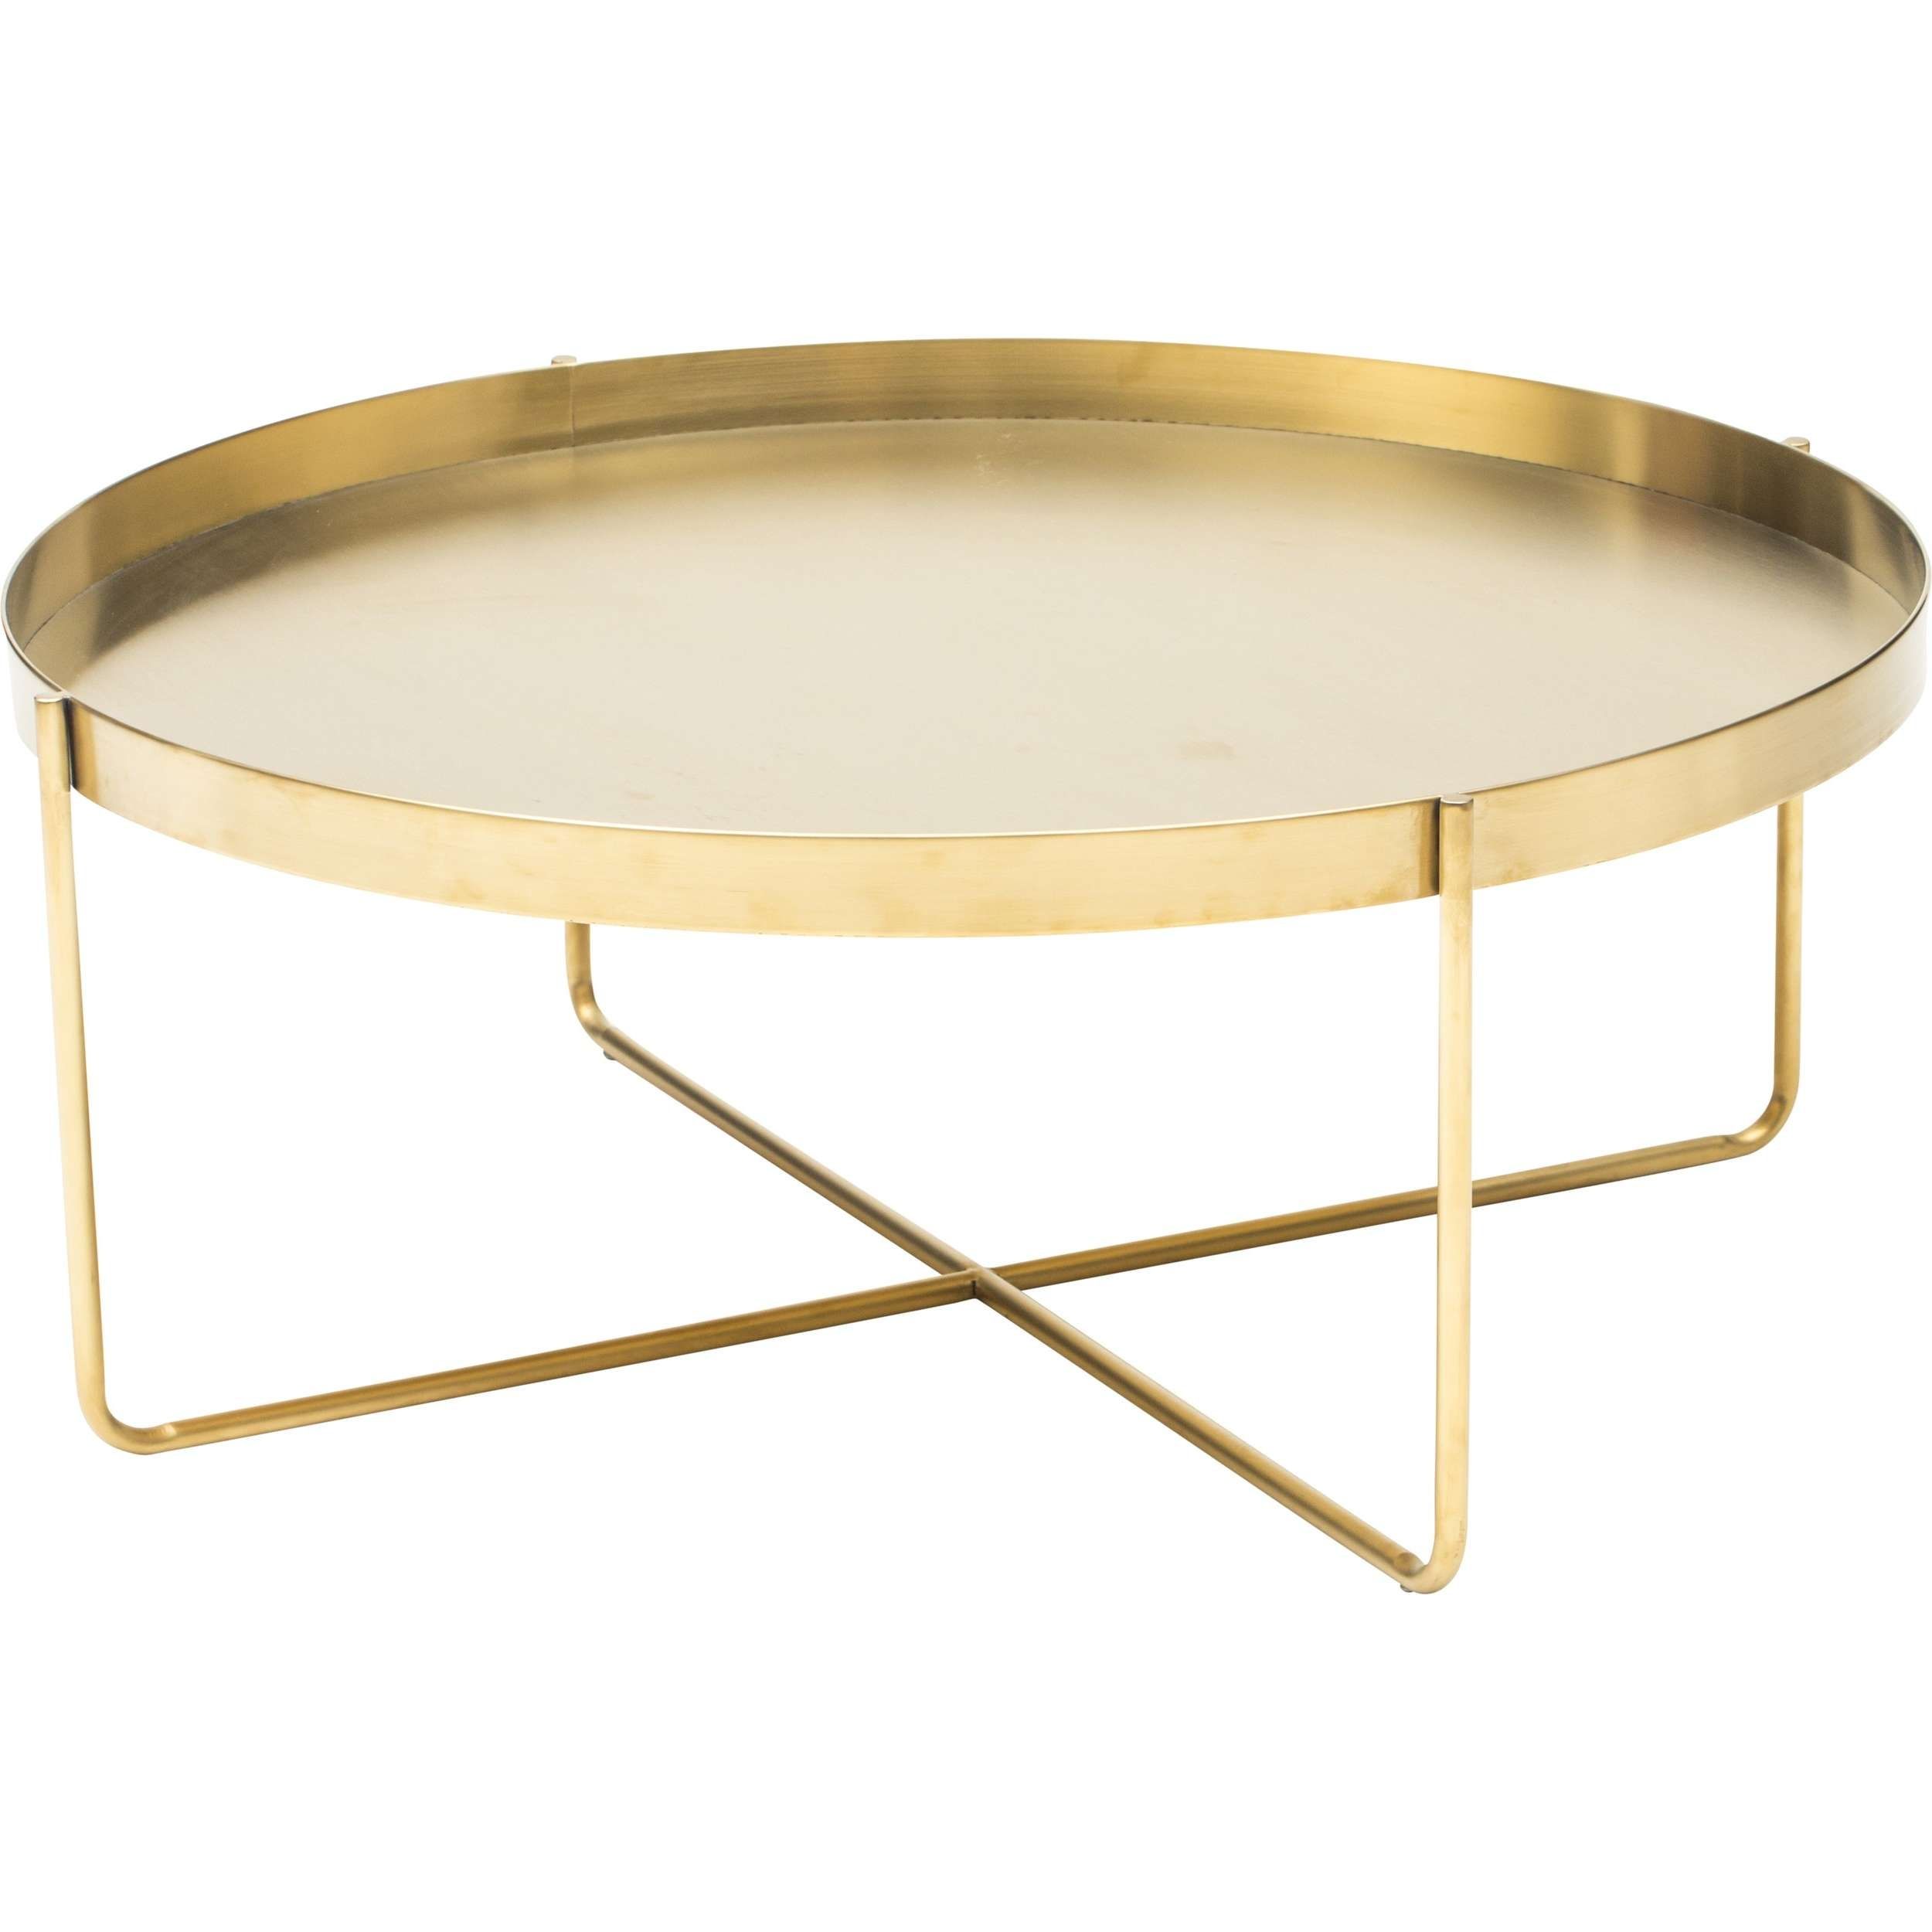 Coffee Tables : Amazing Gold Coffee Table Round Gaultier Oval For Well Known Gold Round Coffee Table (View 9 of 20)